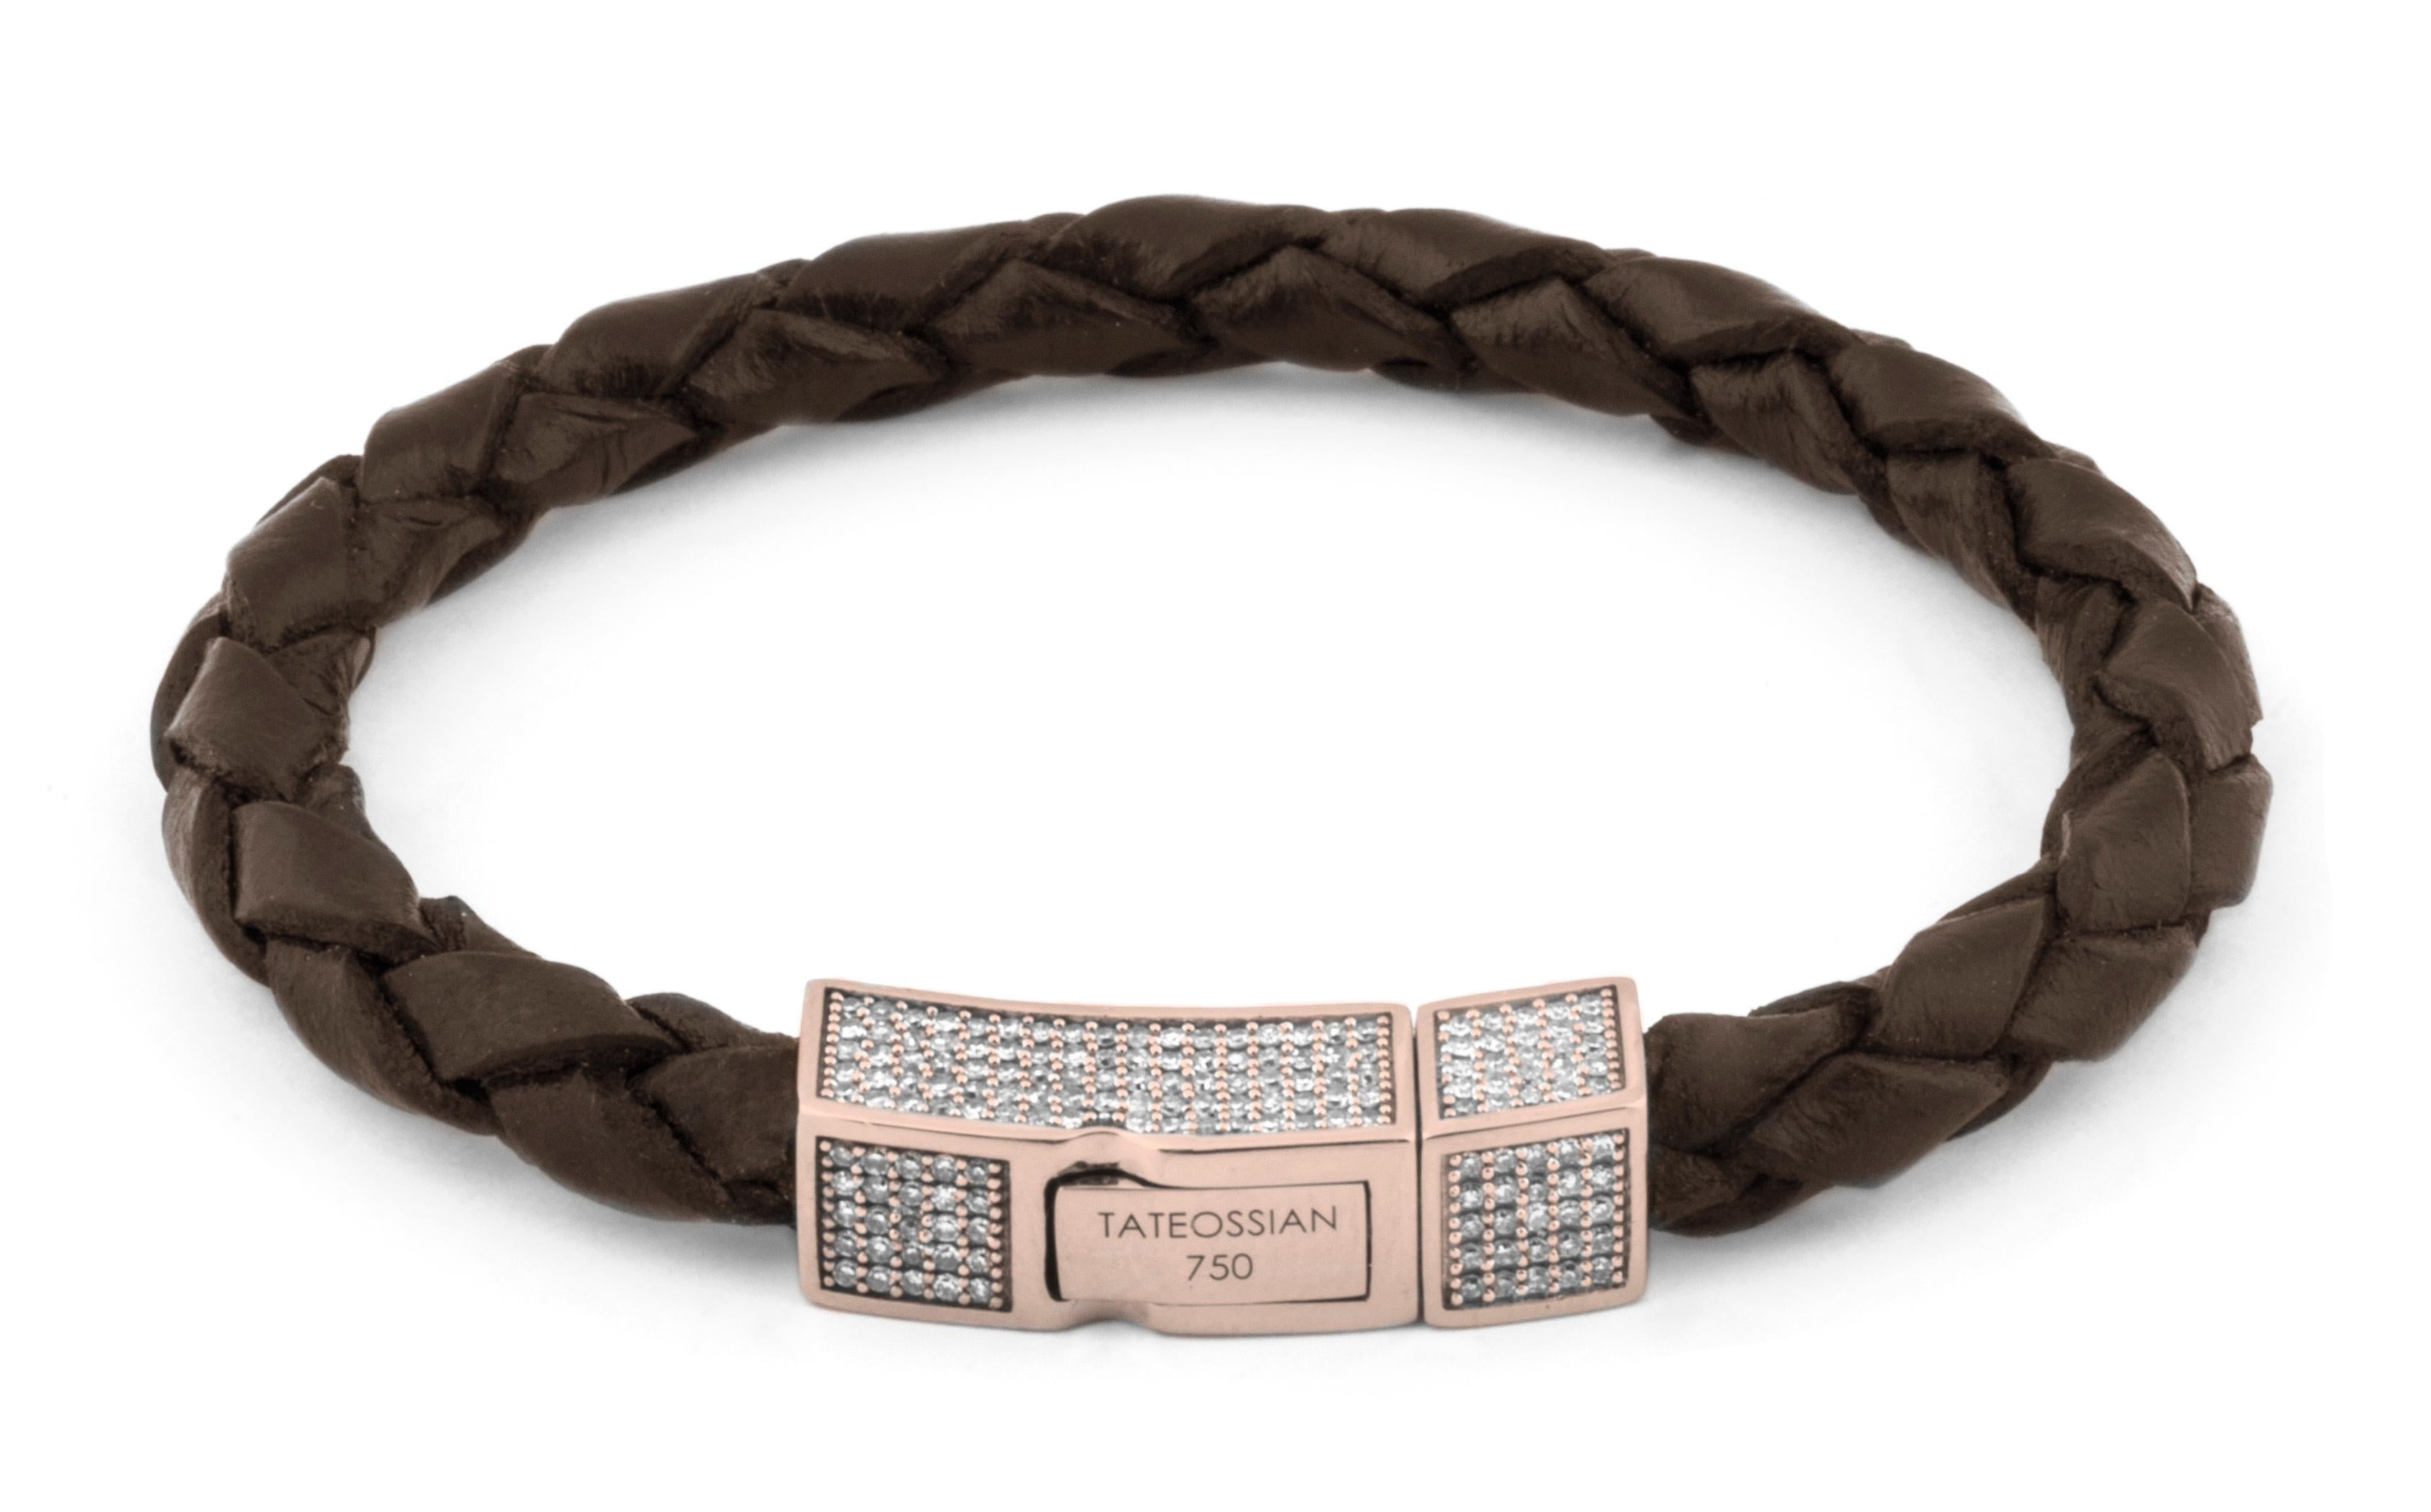 A luxury version of the Tateossian signature leather Scoubidou bracelet with an 18K gold clasp. The clasp has been beautifully covered with a pave of white diamonds  (HI colour, SI quality) which have been selected and set by hand under a microscope